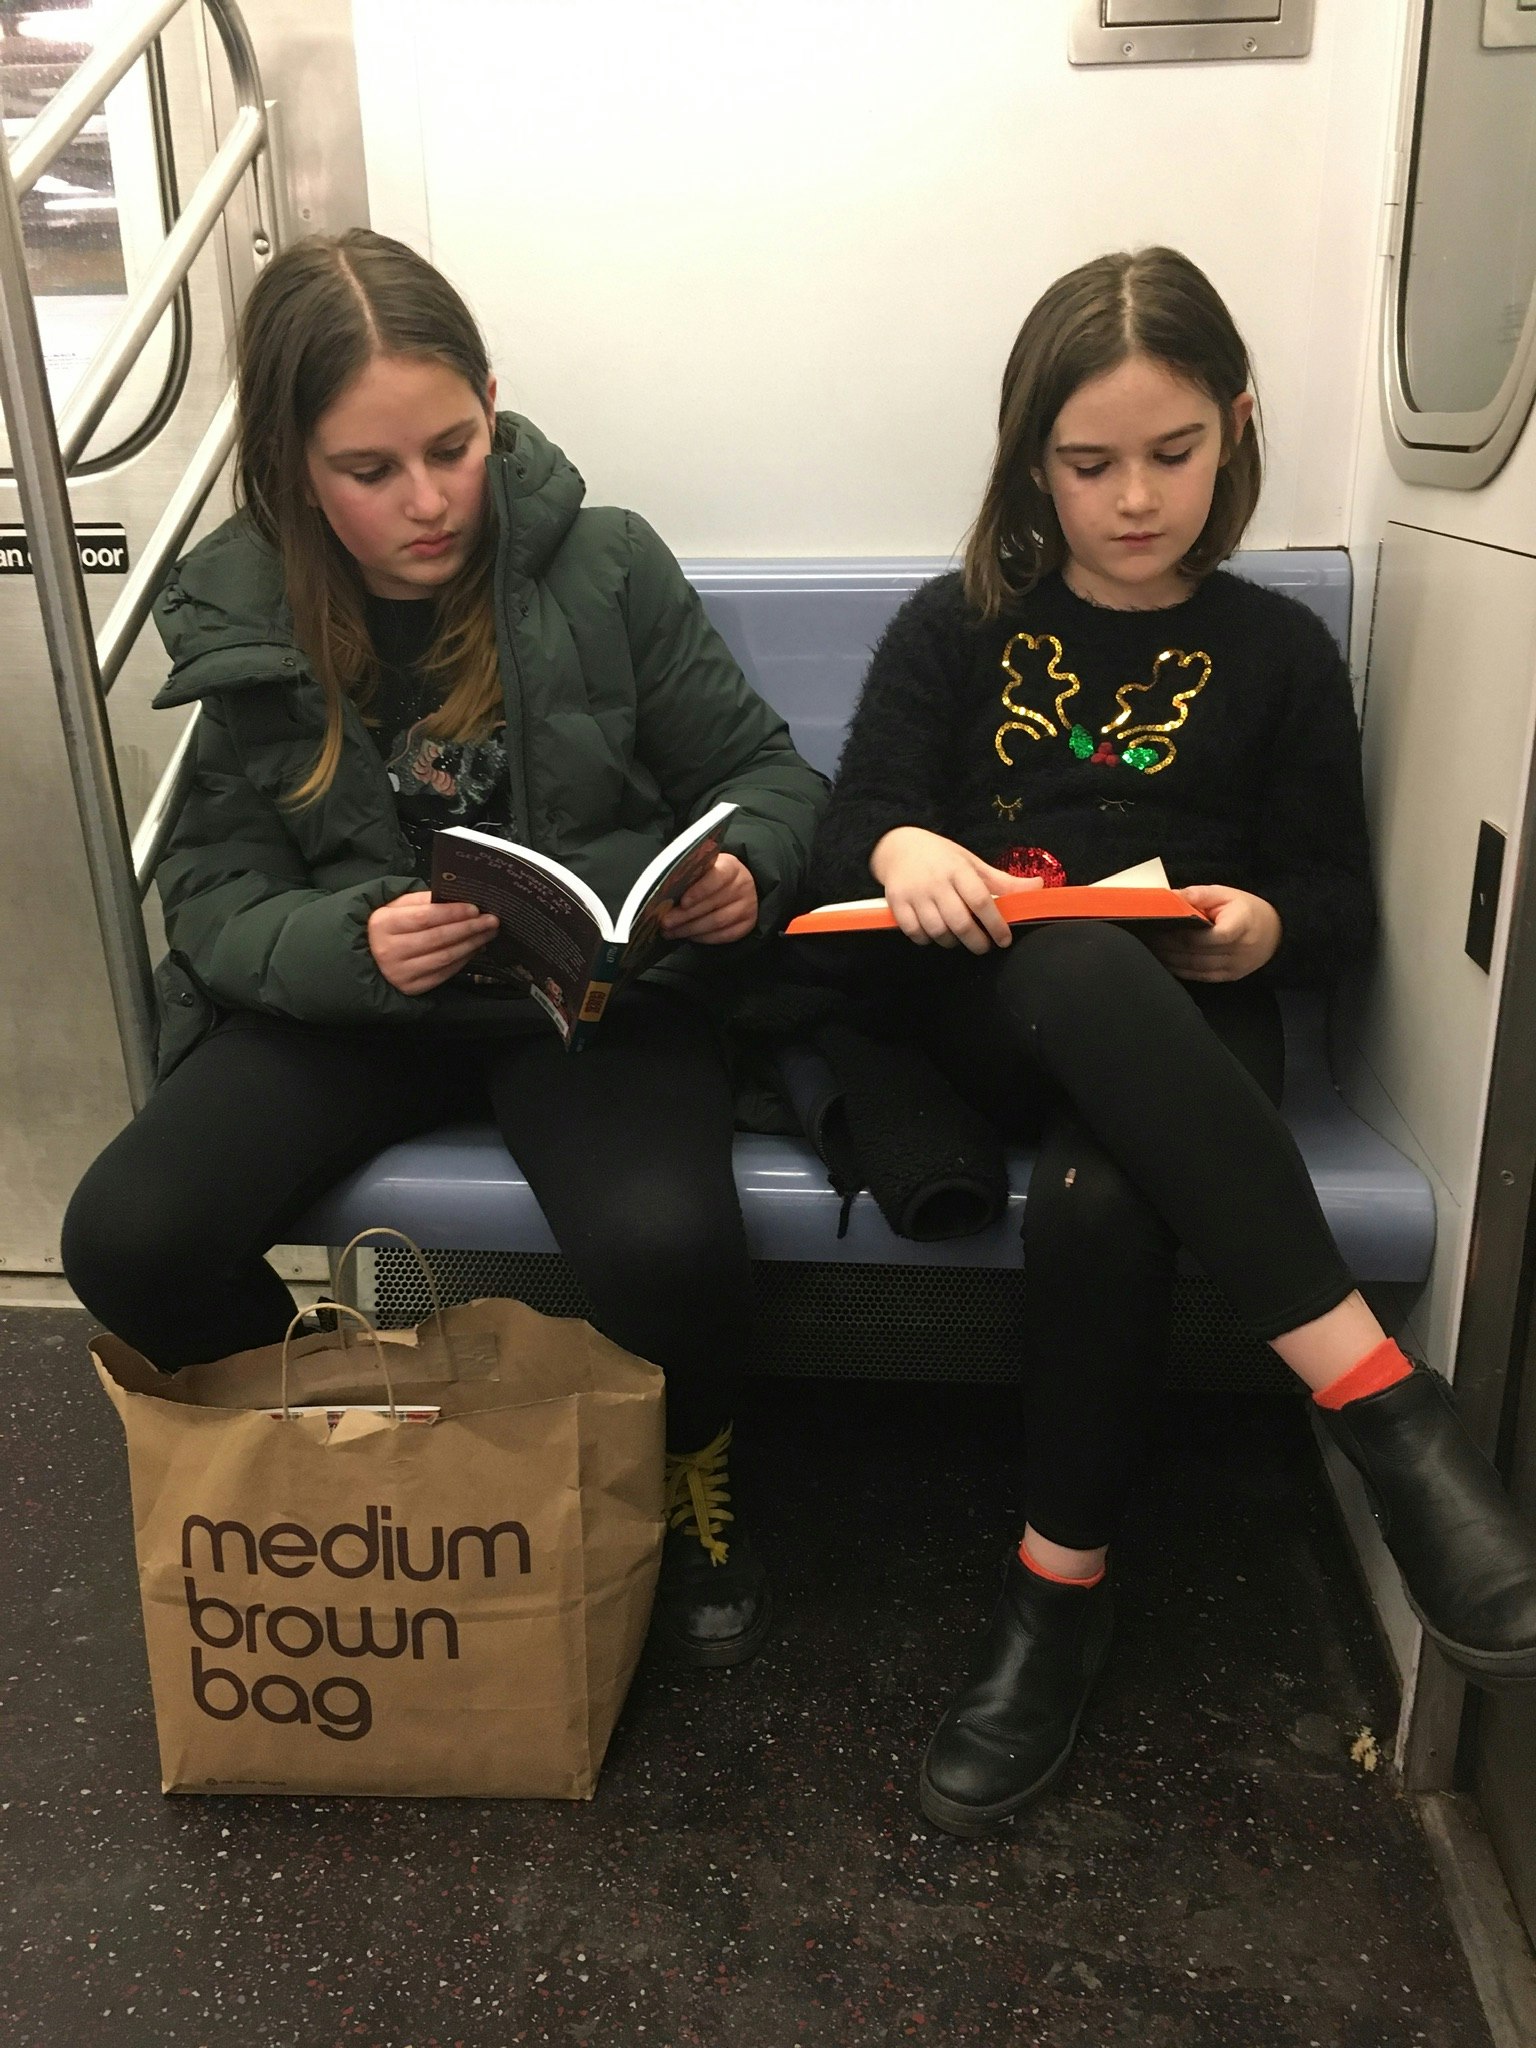 Tasmin's daughters sit reading books as they ride the subway in New York City.